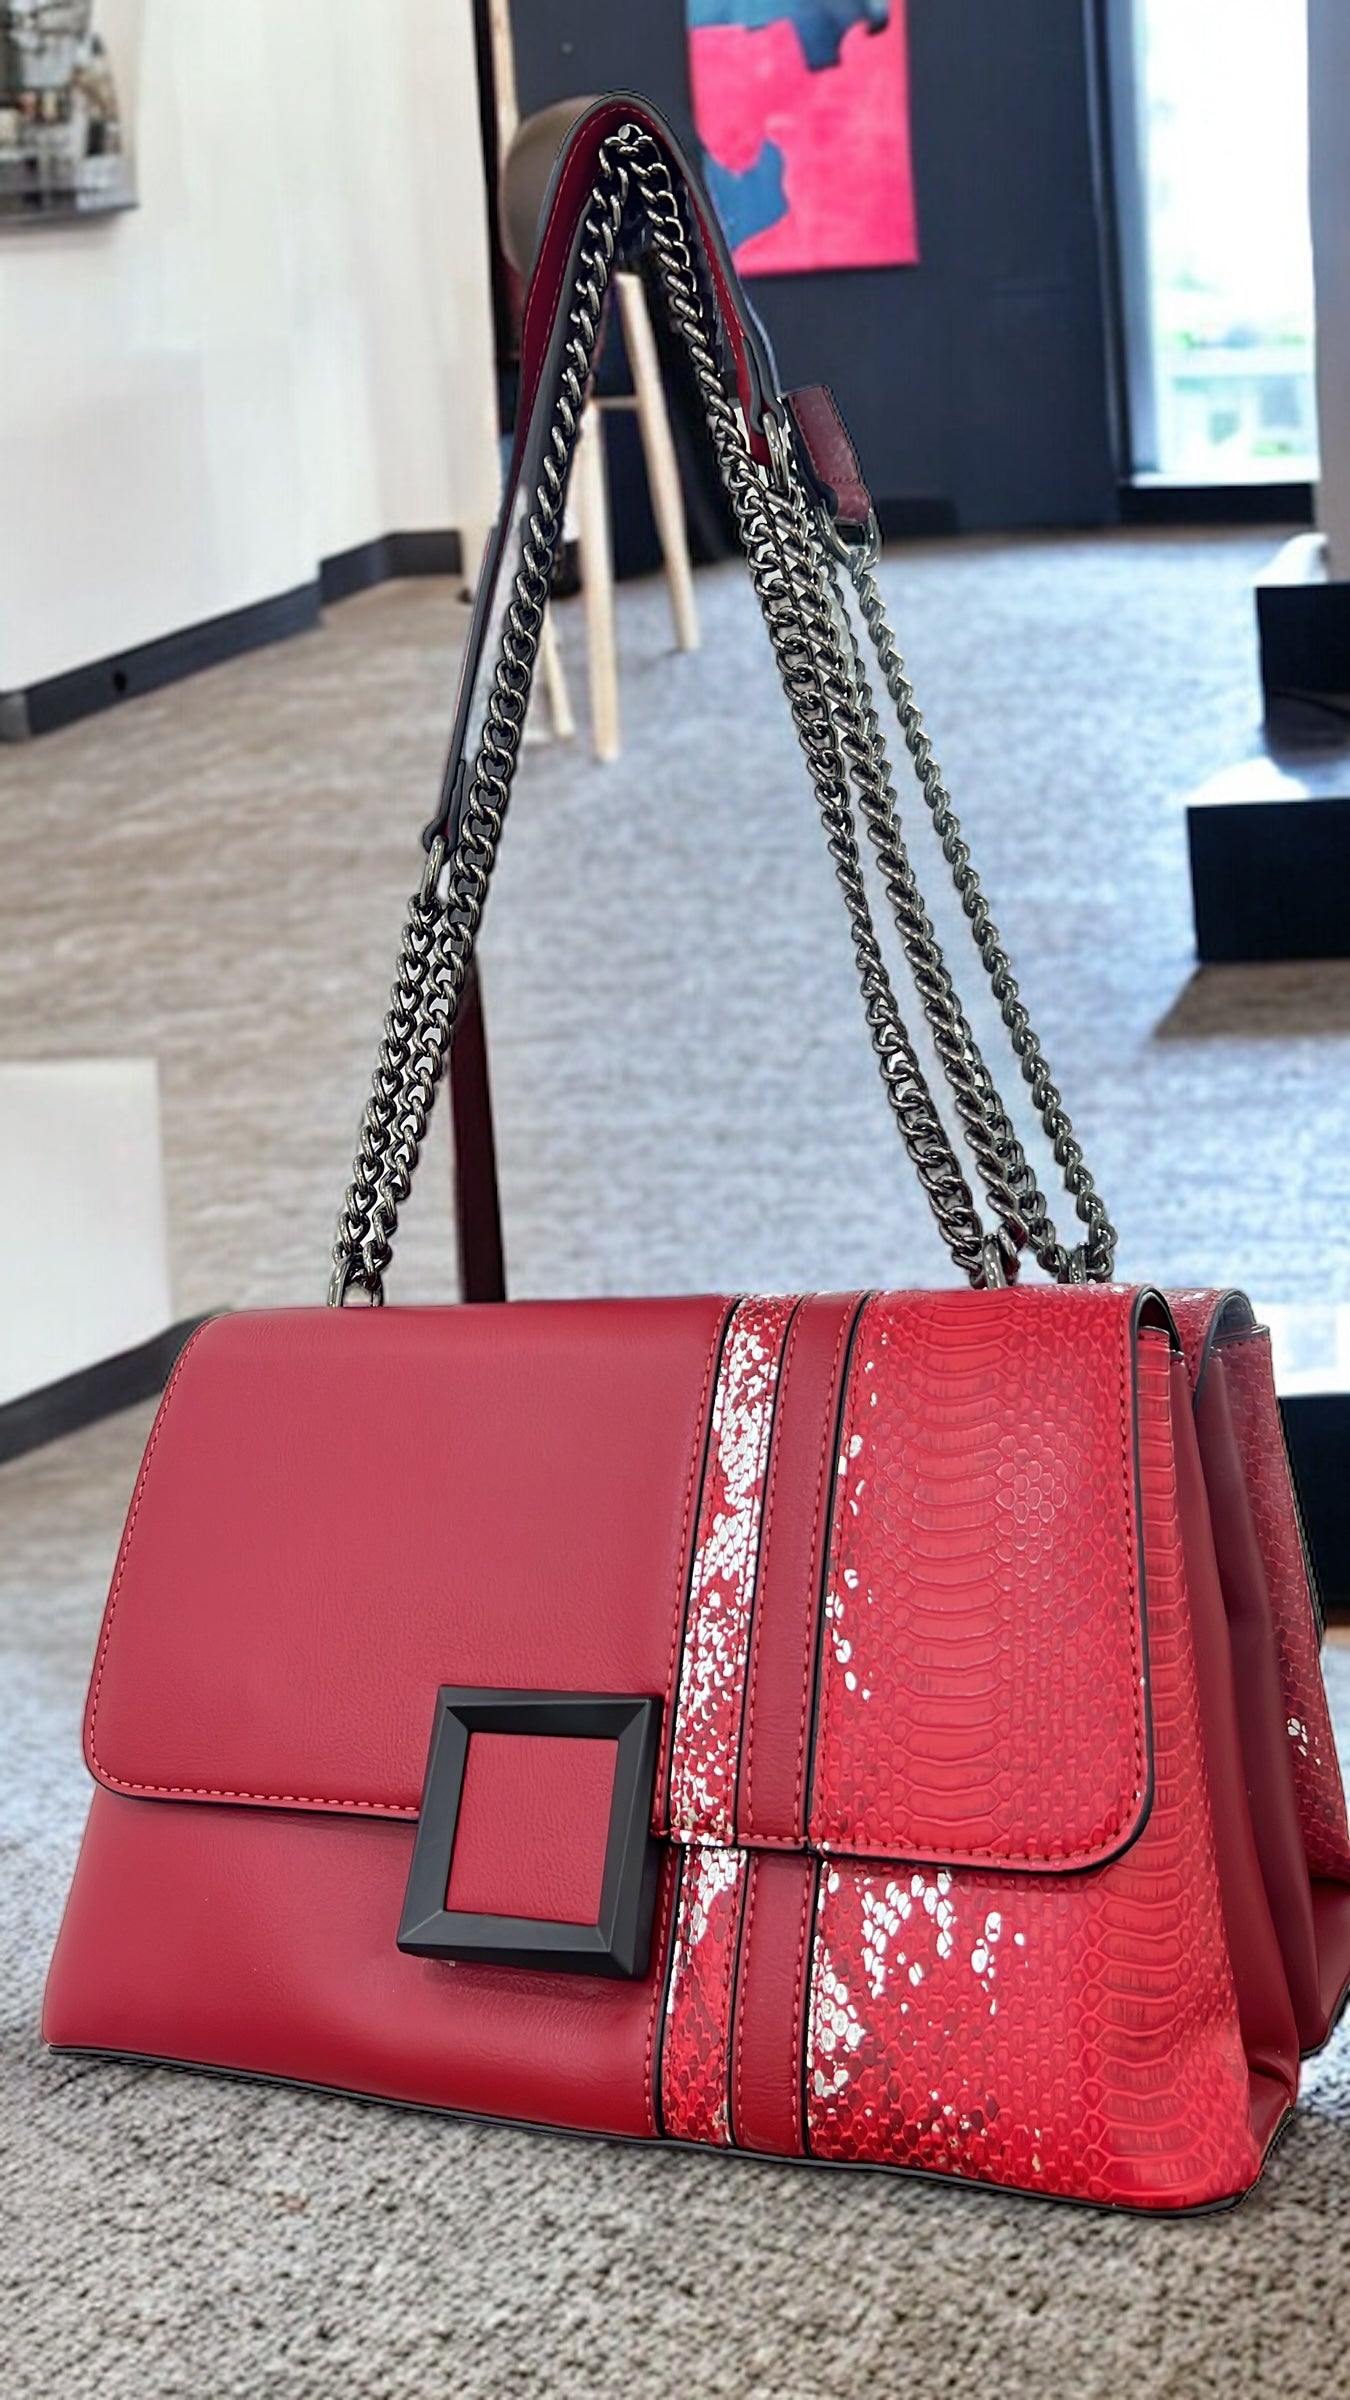 BAGCO BROCADE PATTERN CHAIN HANDLE SIDE BAG IN RED